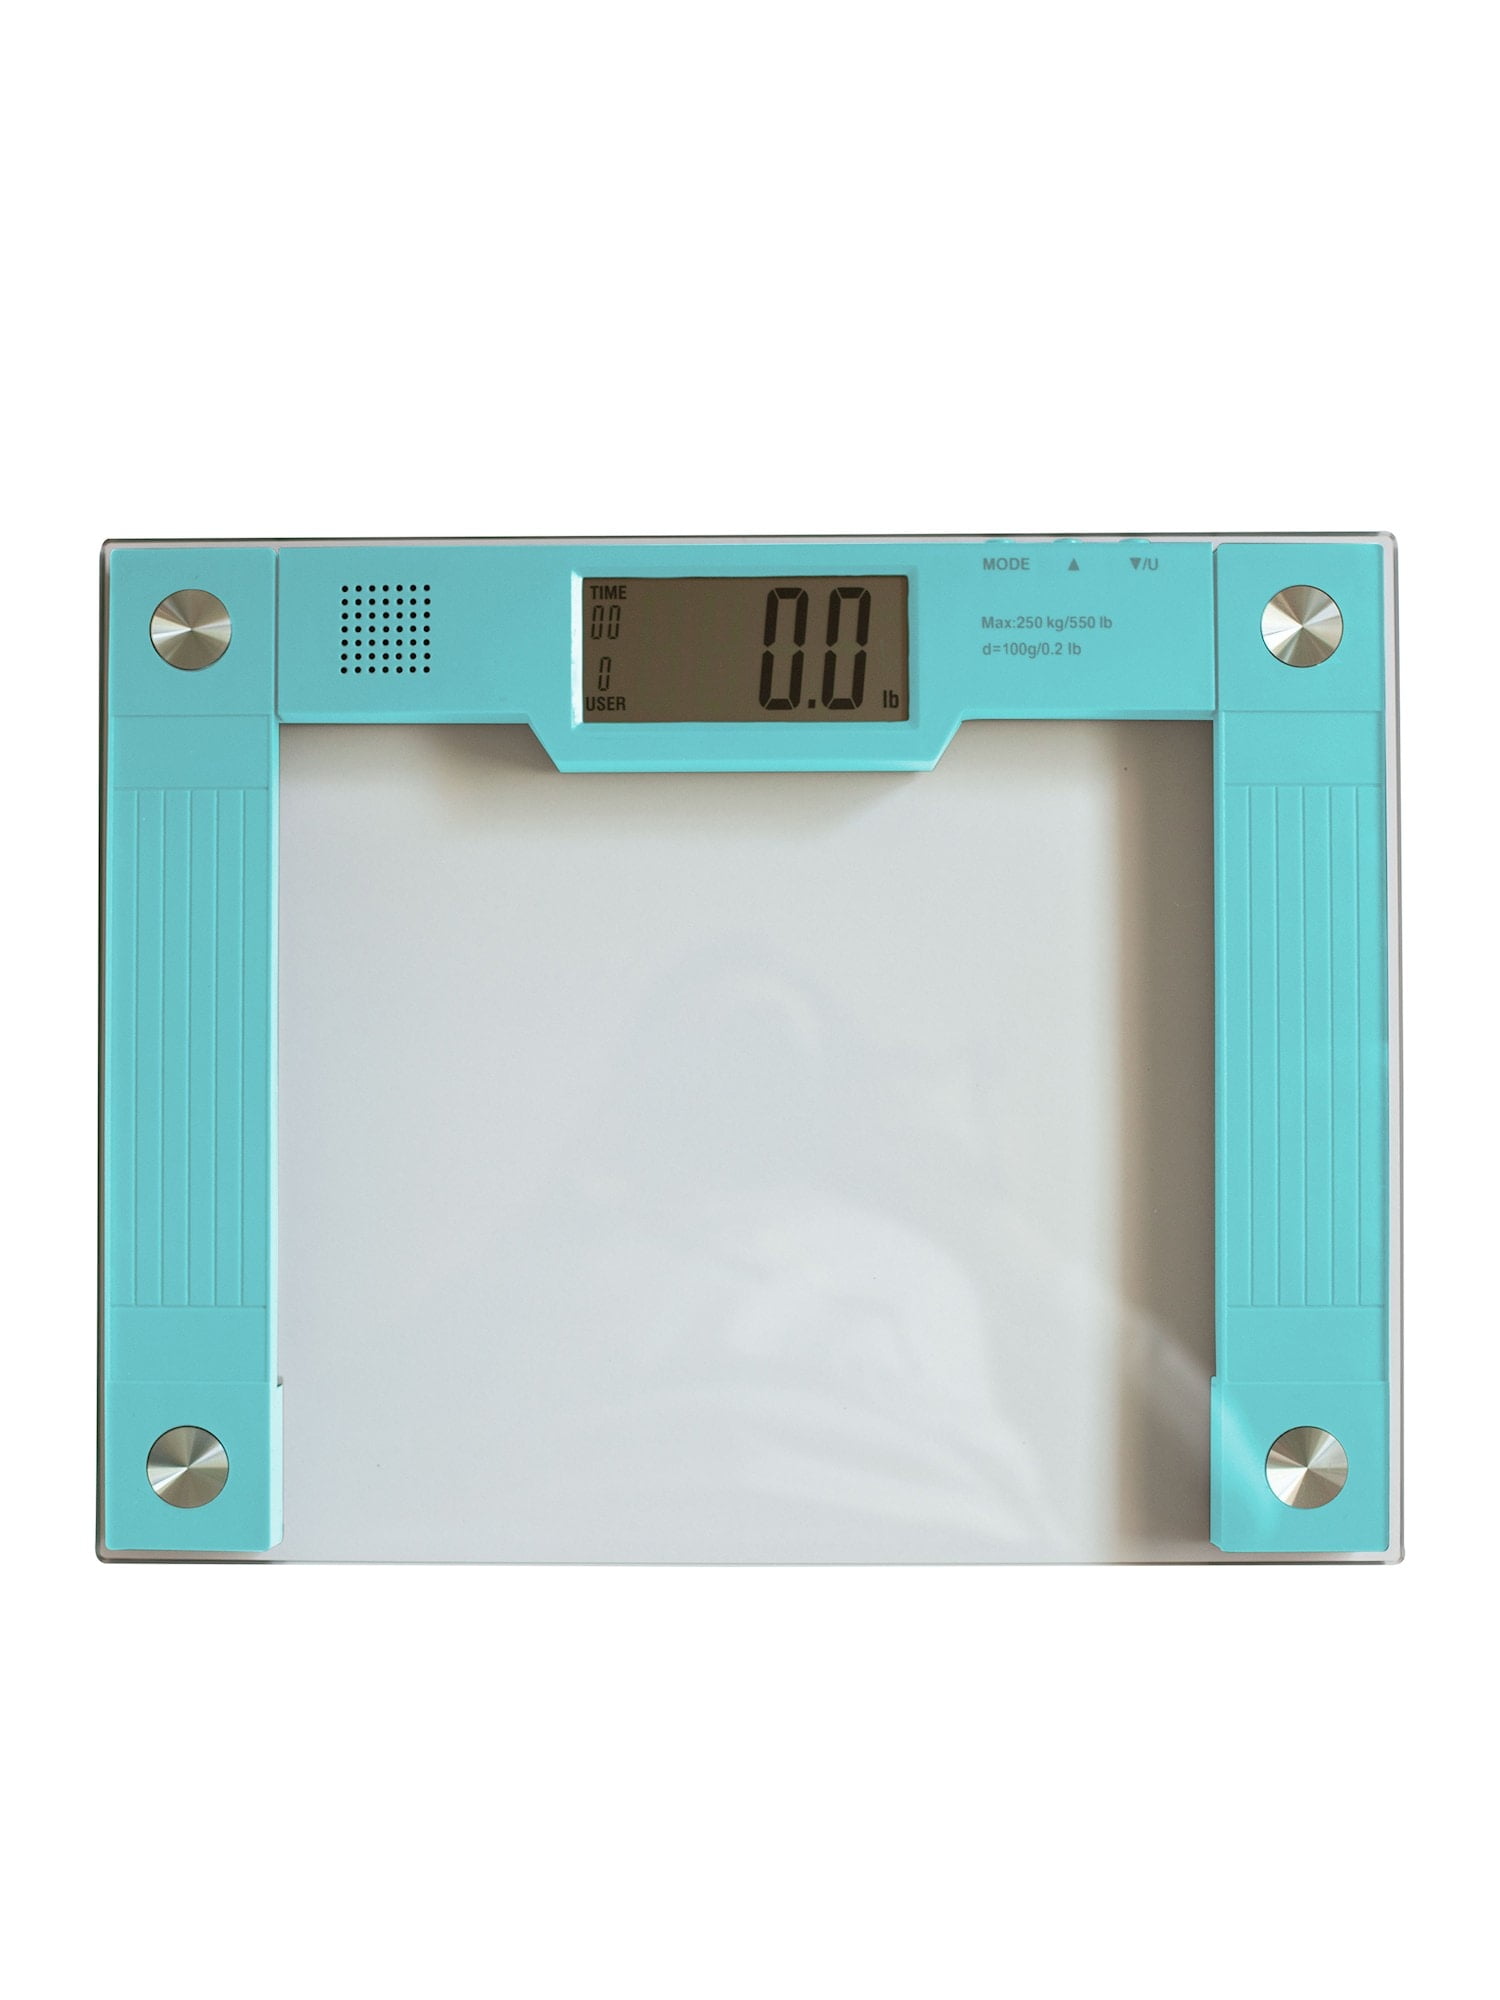 Runstar 550lb Bathroom Digital Scale for Body Weight with Ultra-Wide Platform and Large LCD Display, Accurate High Precision Scale with Extra-High